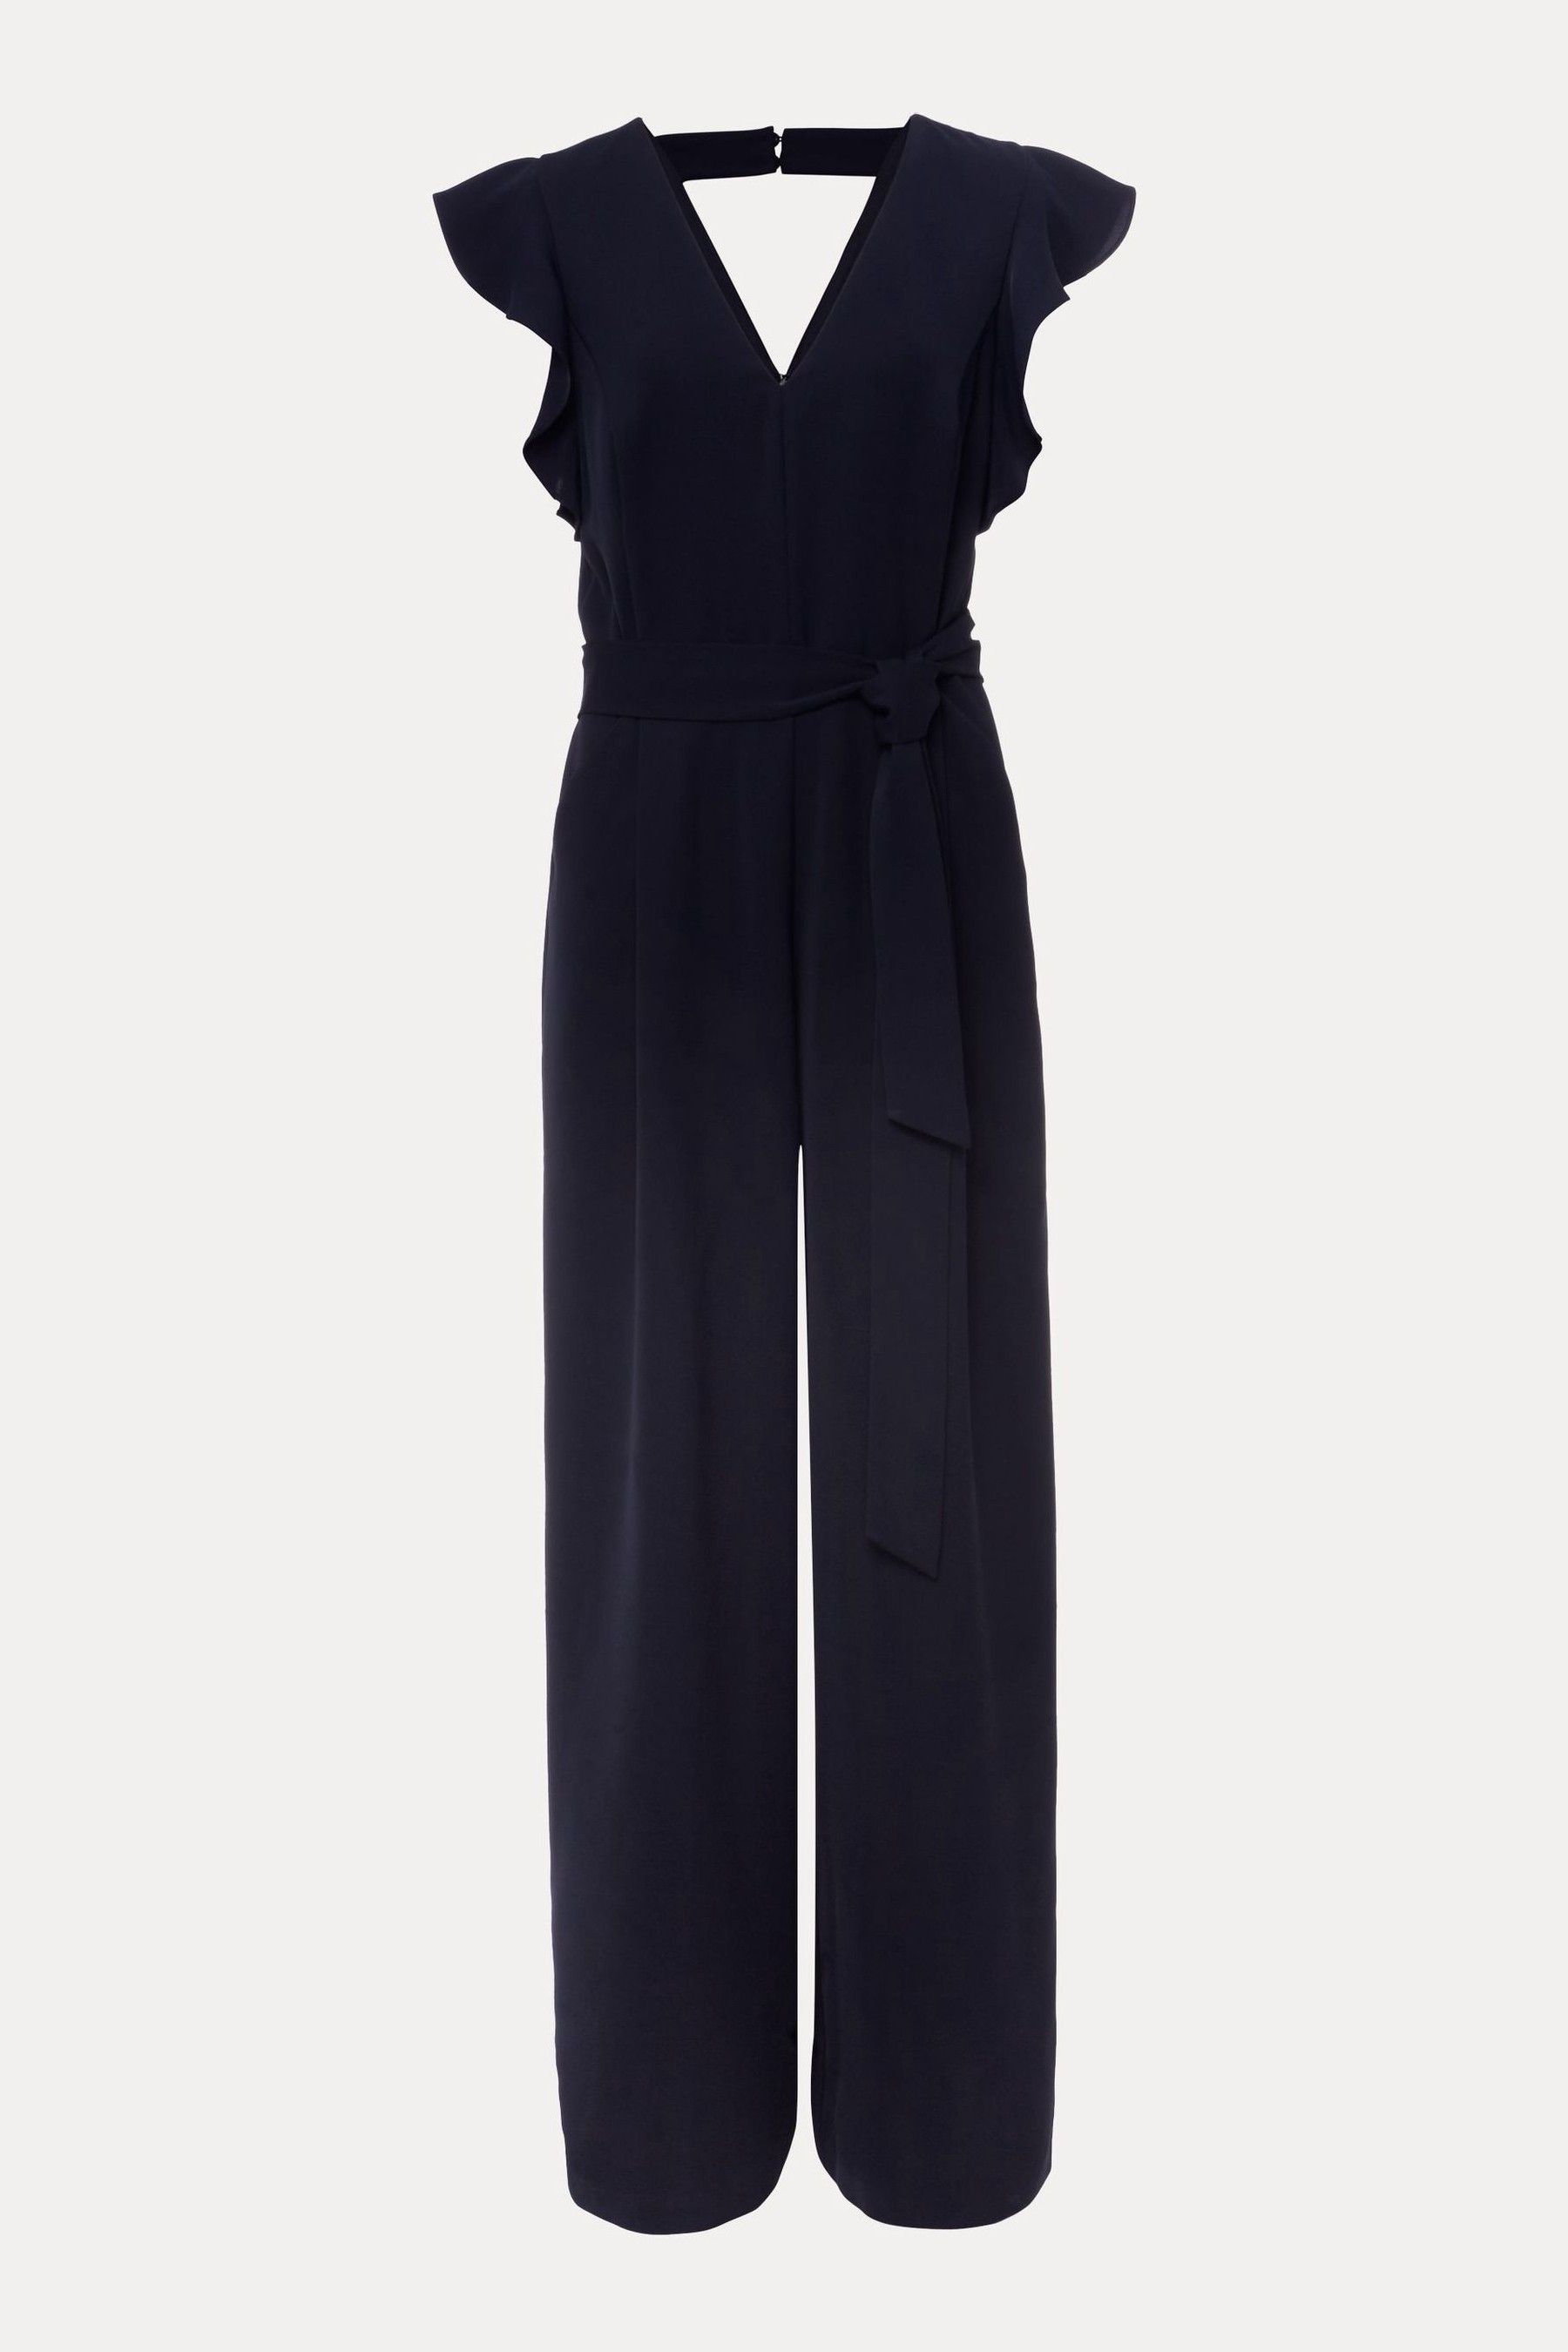 Buy Phase Eight Blue Petite Kallie V-Neck Frill Jumpsuit from the Next ...